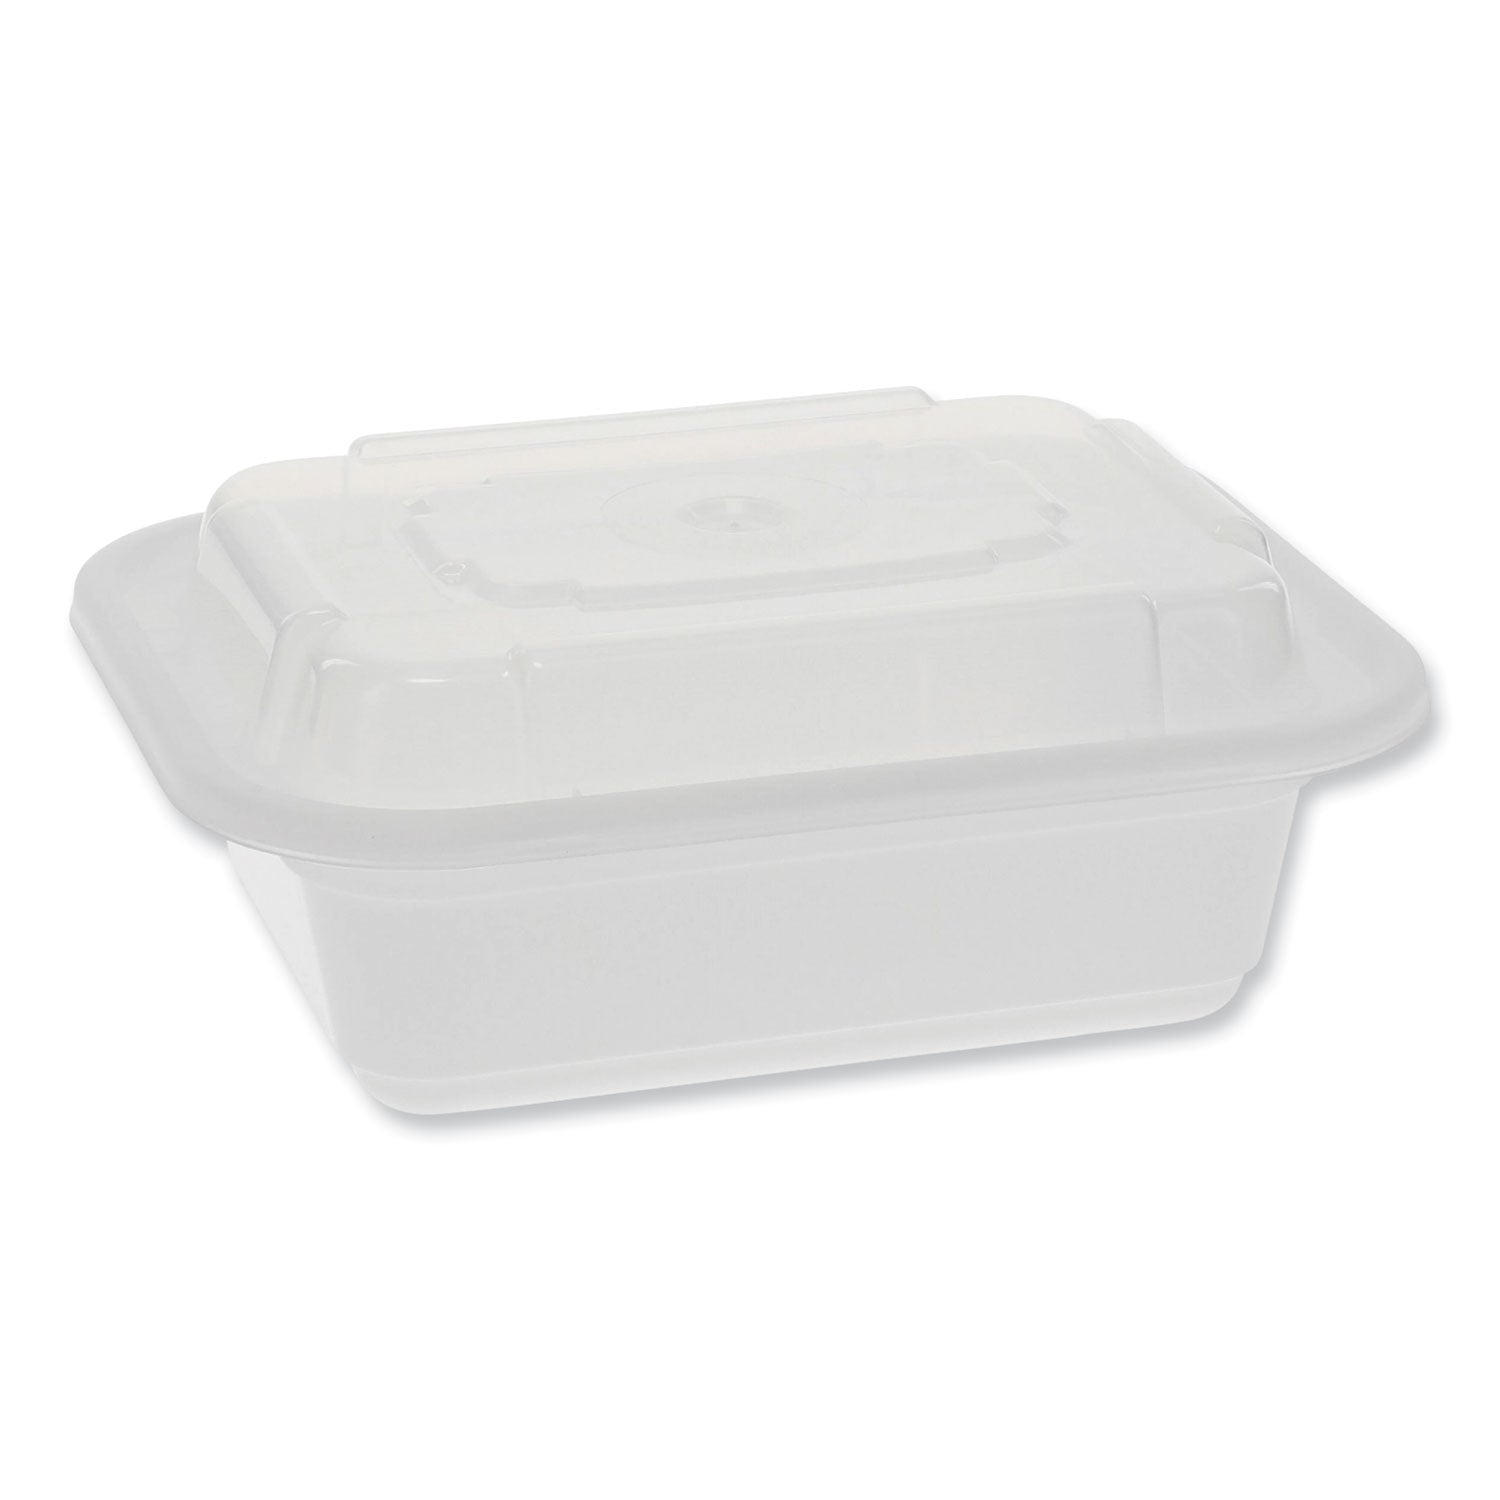 newspring-versatainer-microwavable-containers-rectangular-12-oz-45-x-55-x-212-white-clear-plastic-150-carton_pctnc818 - 1